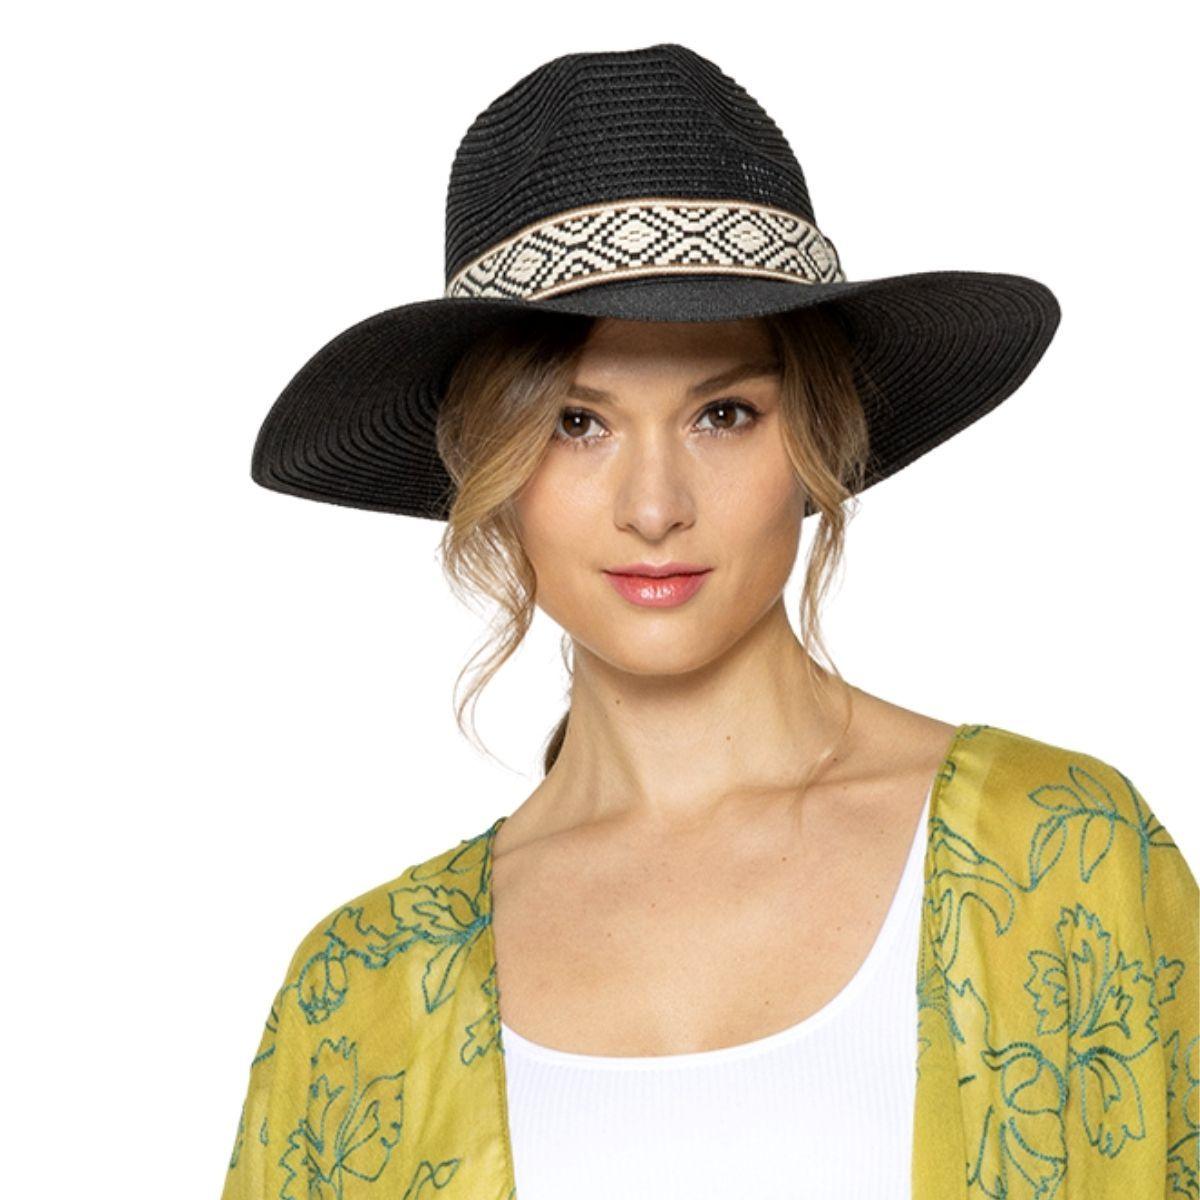 Black Womens Panama Straw Hat with Woven Detail